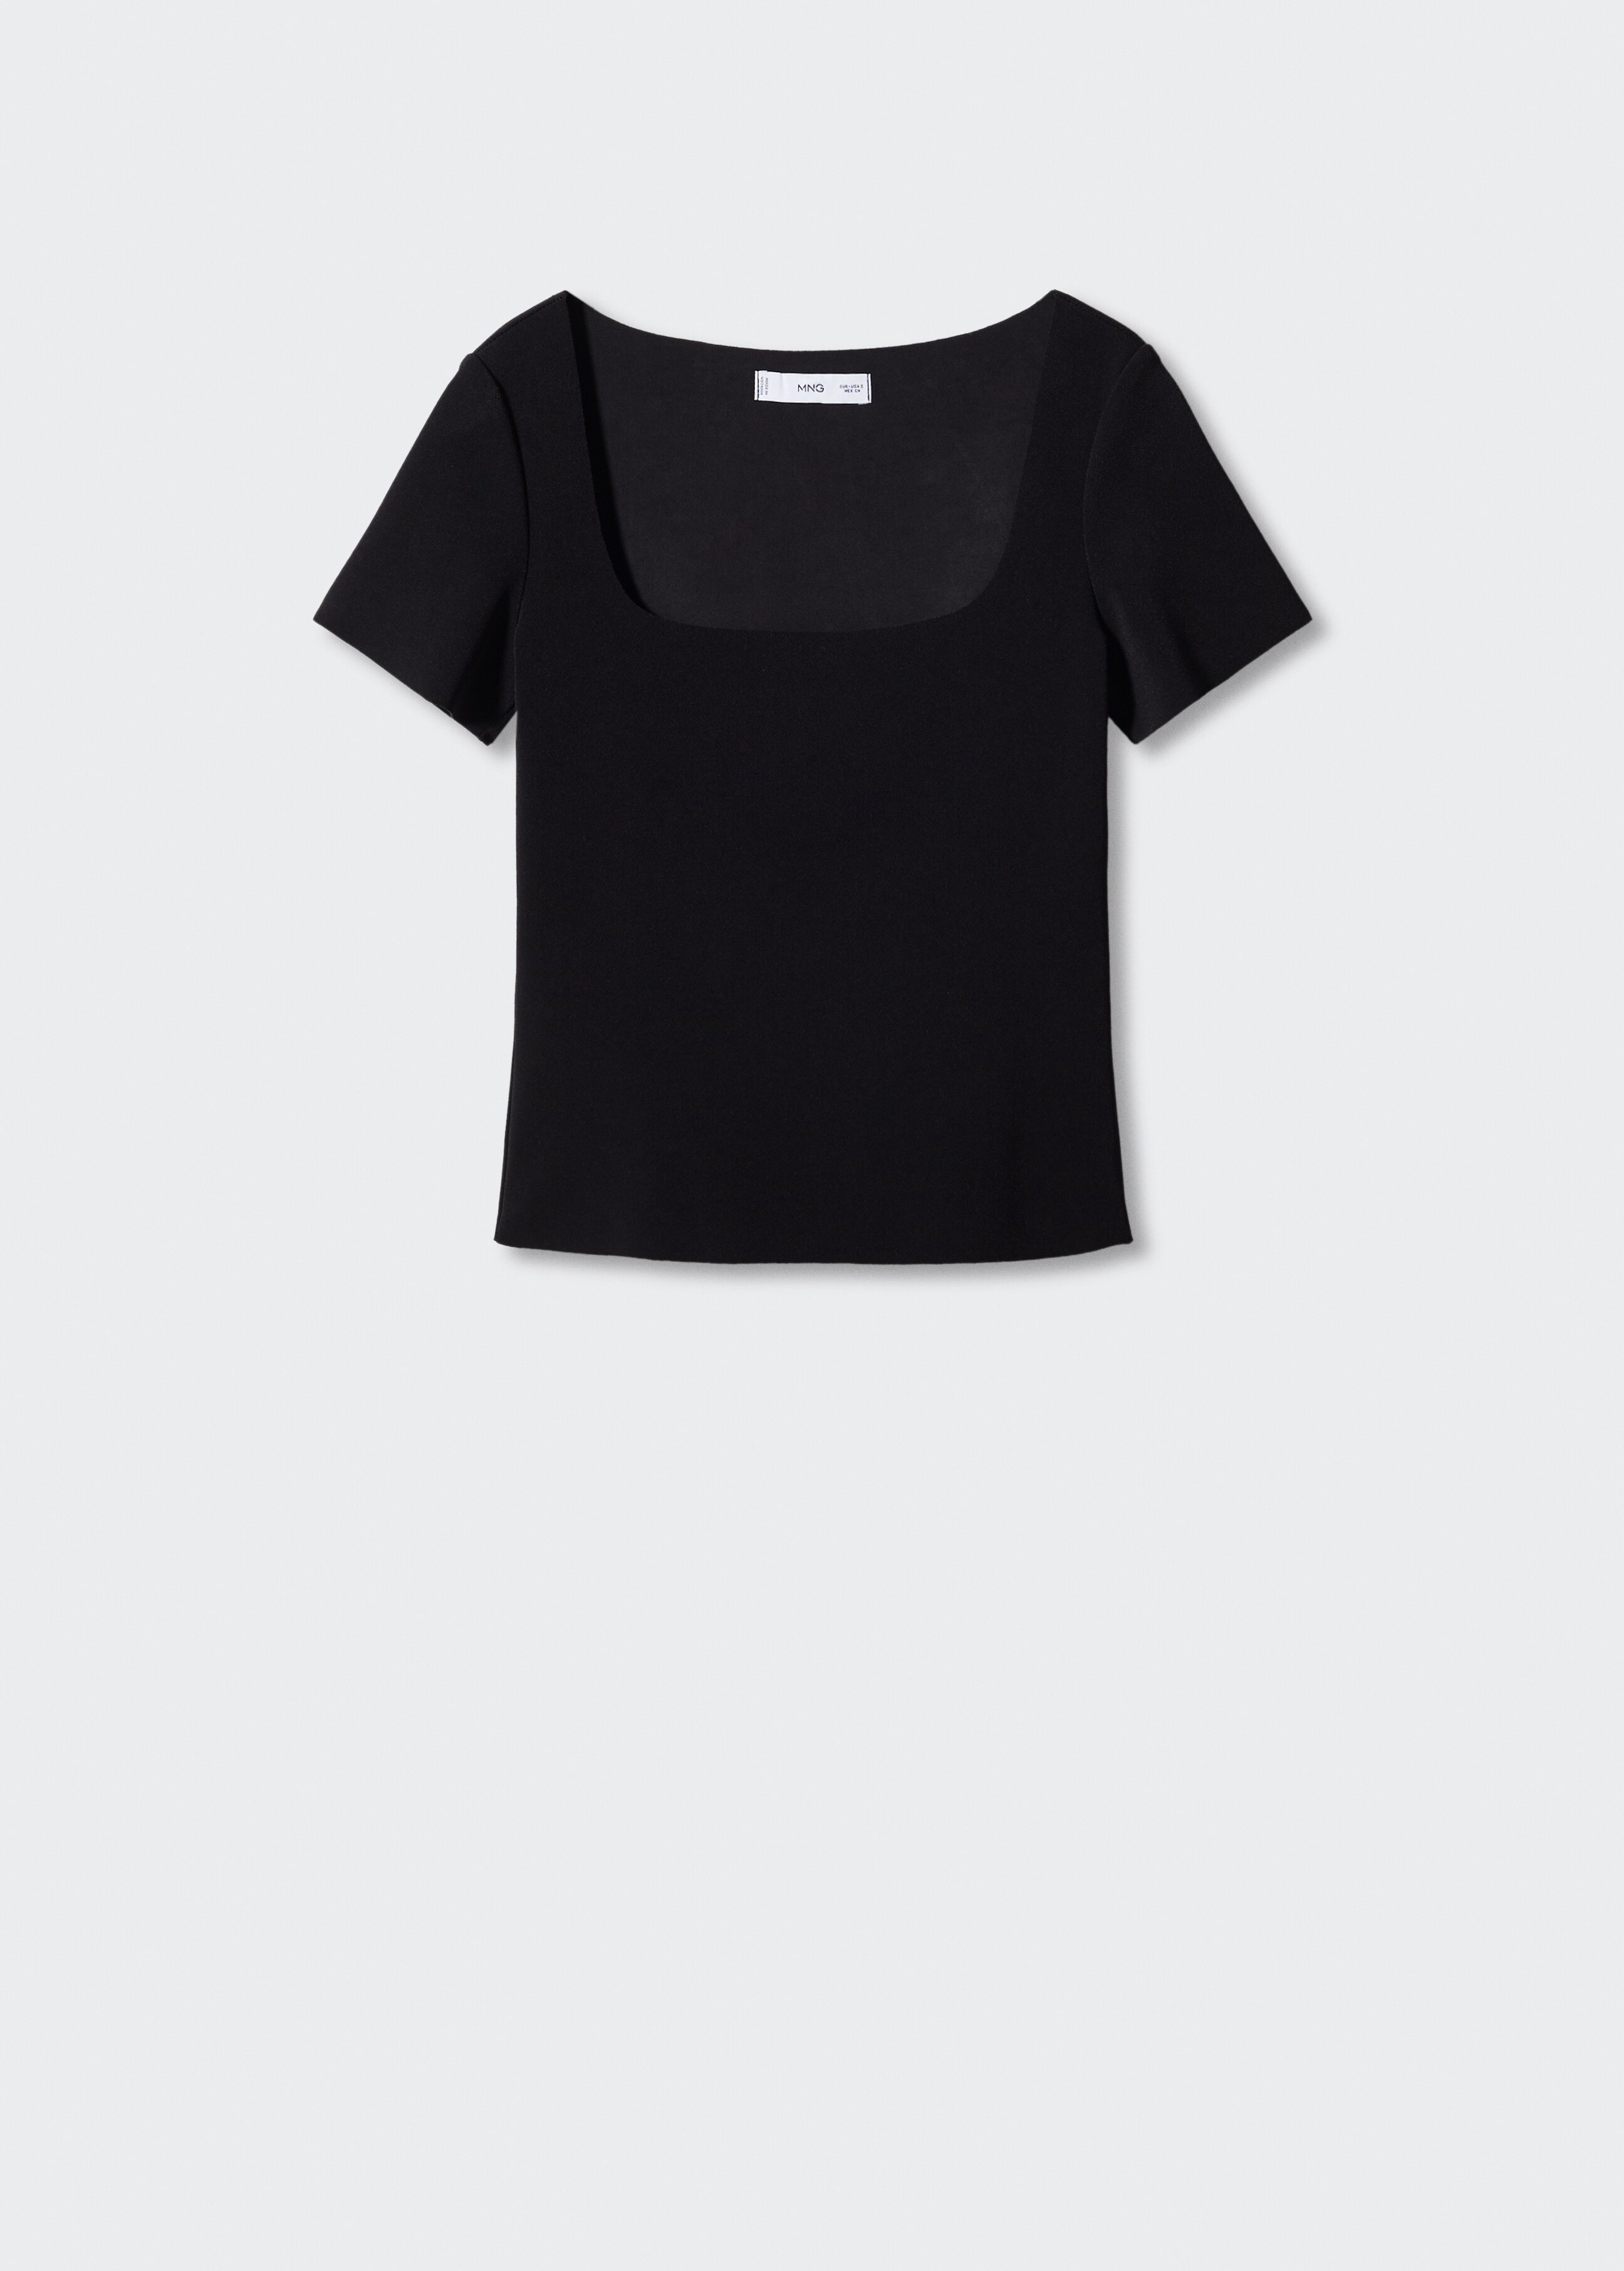 Square neck t-shirt - Article without model